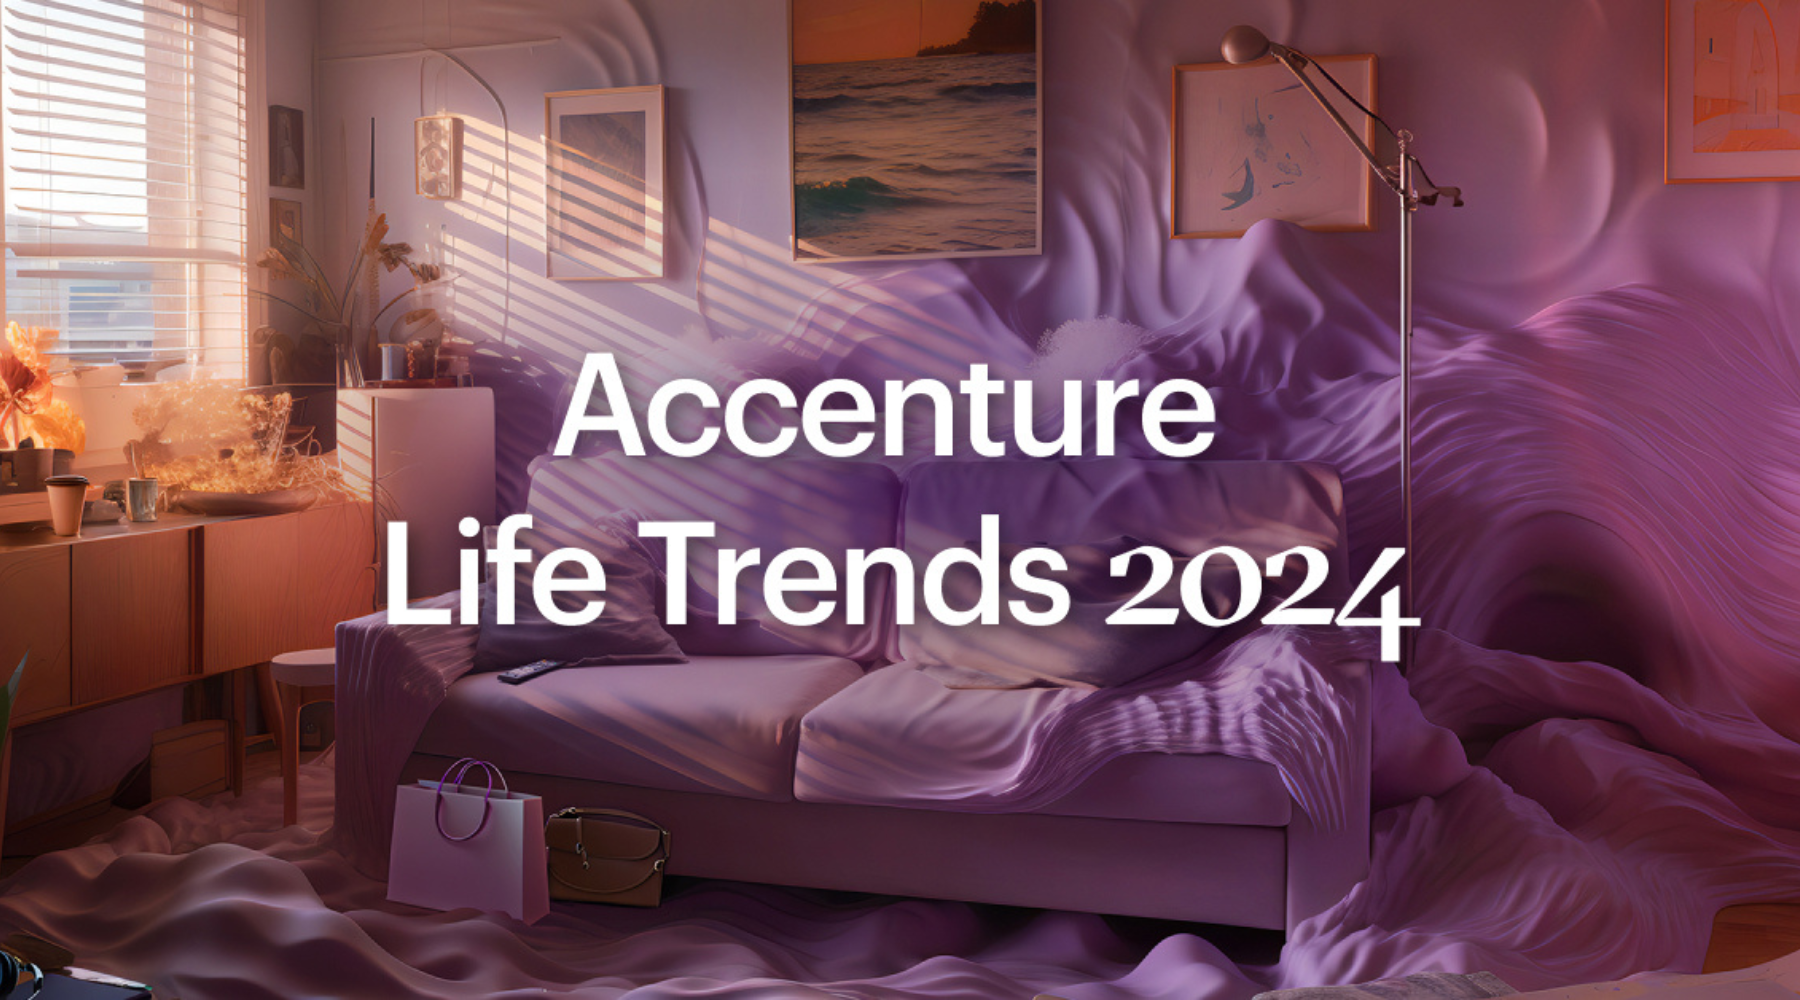 Accenture’s Annual Life Trends Forecasts a Decade of Continued Transformative Change